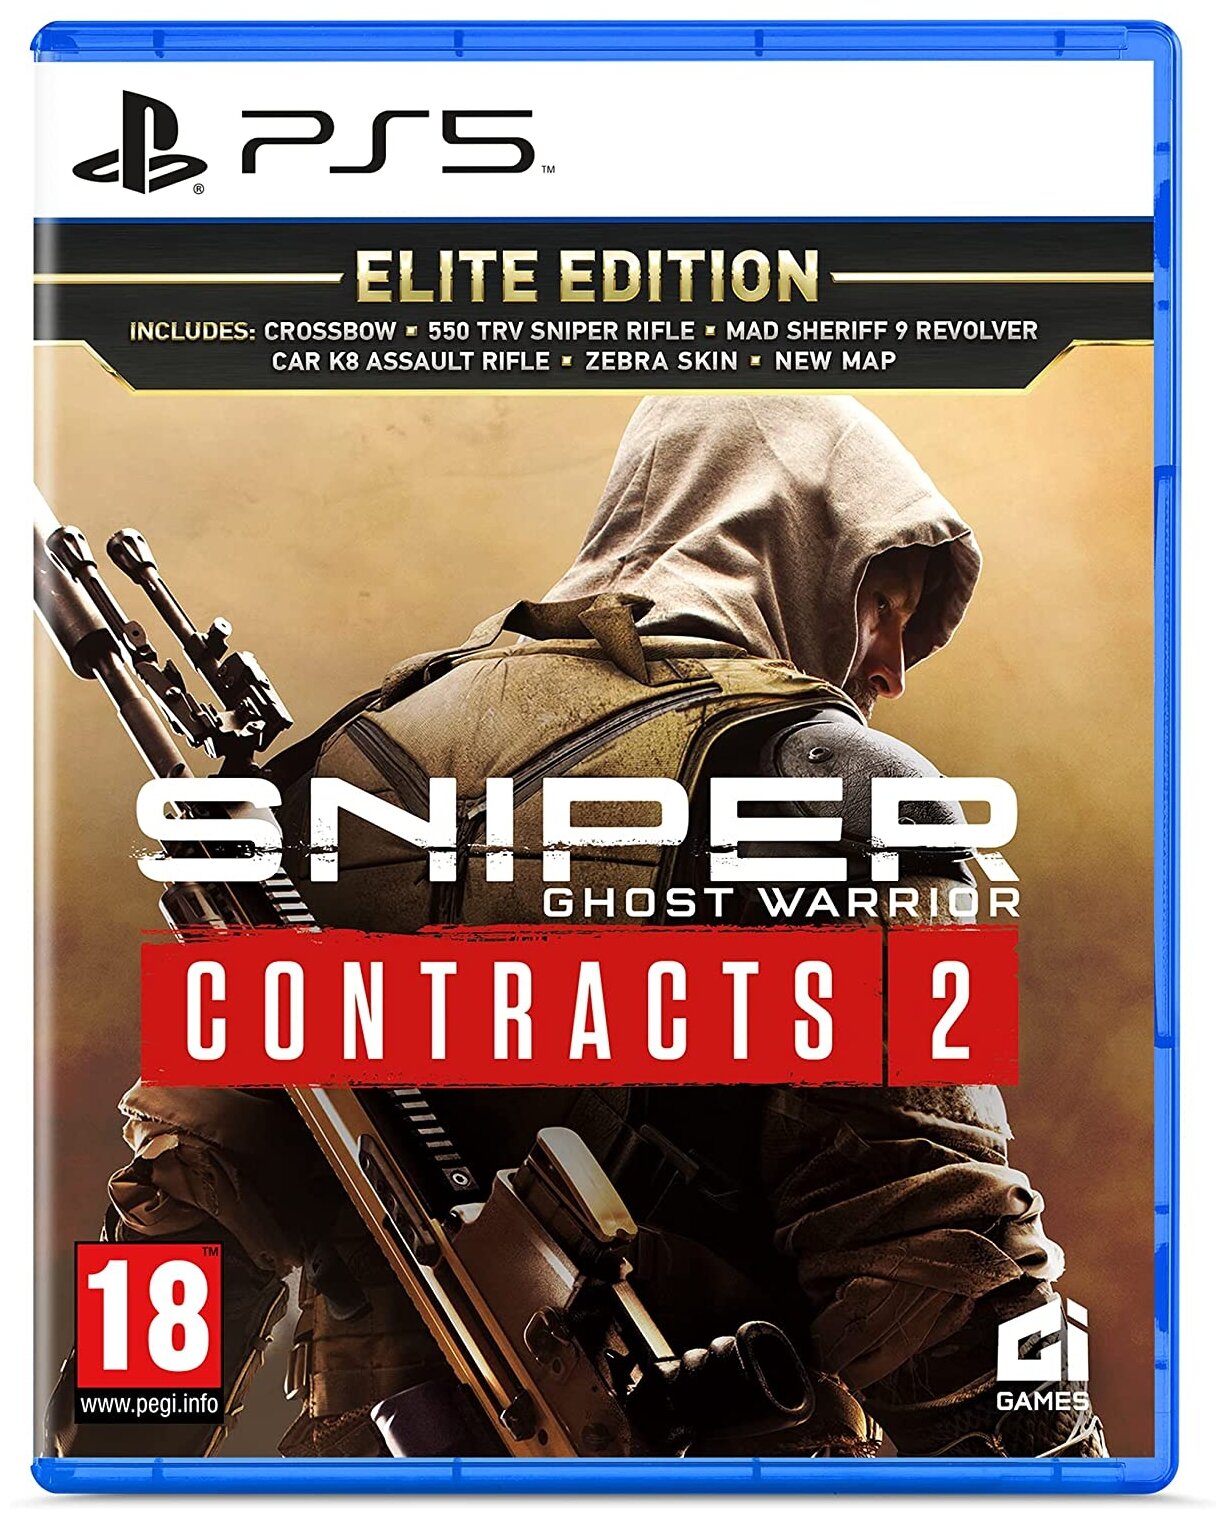 Игра Sniper Ghost Warrior Contracts 2